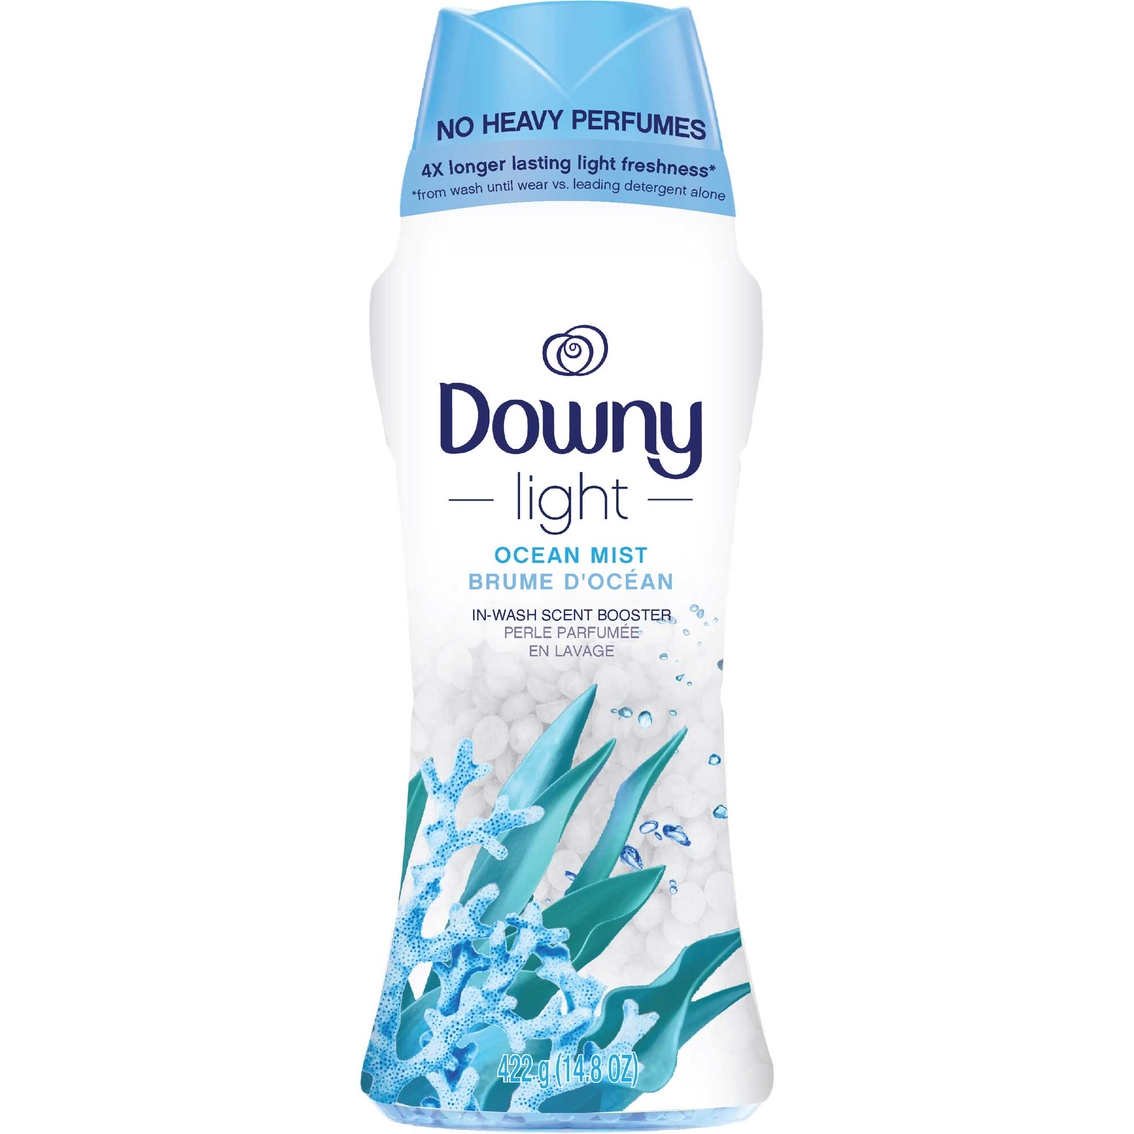 Downy Light In-Wash Scent Booster, Ocean Mist - 752 g